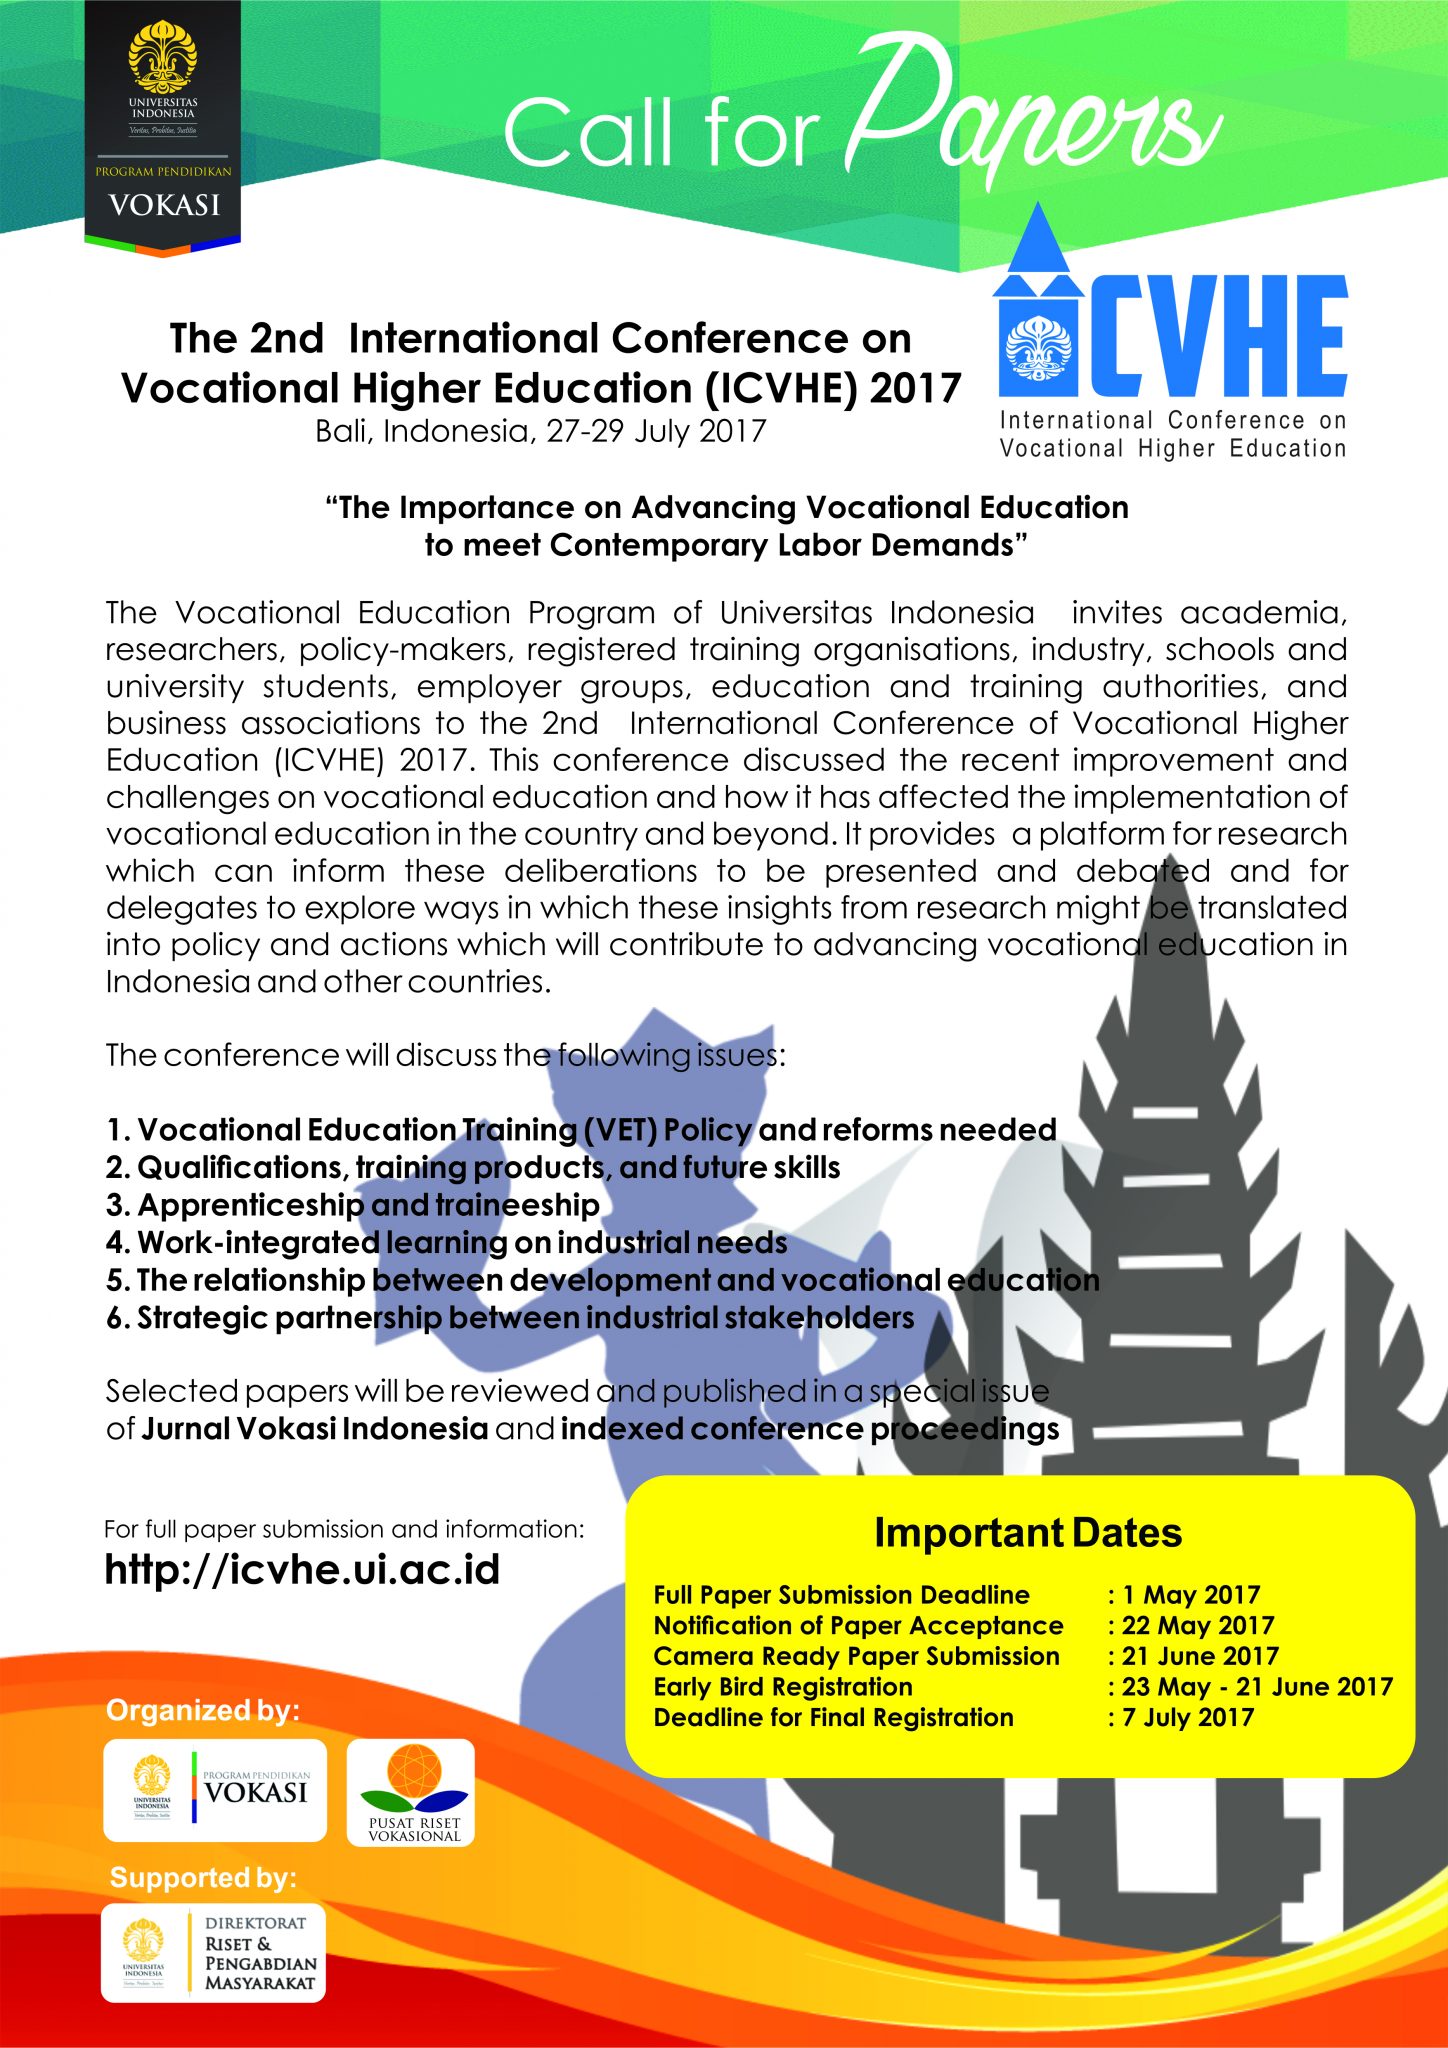 Call for Papers: The 2nd International Conference on Vocational Higher Education (ICVHE) 2017